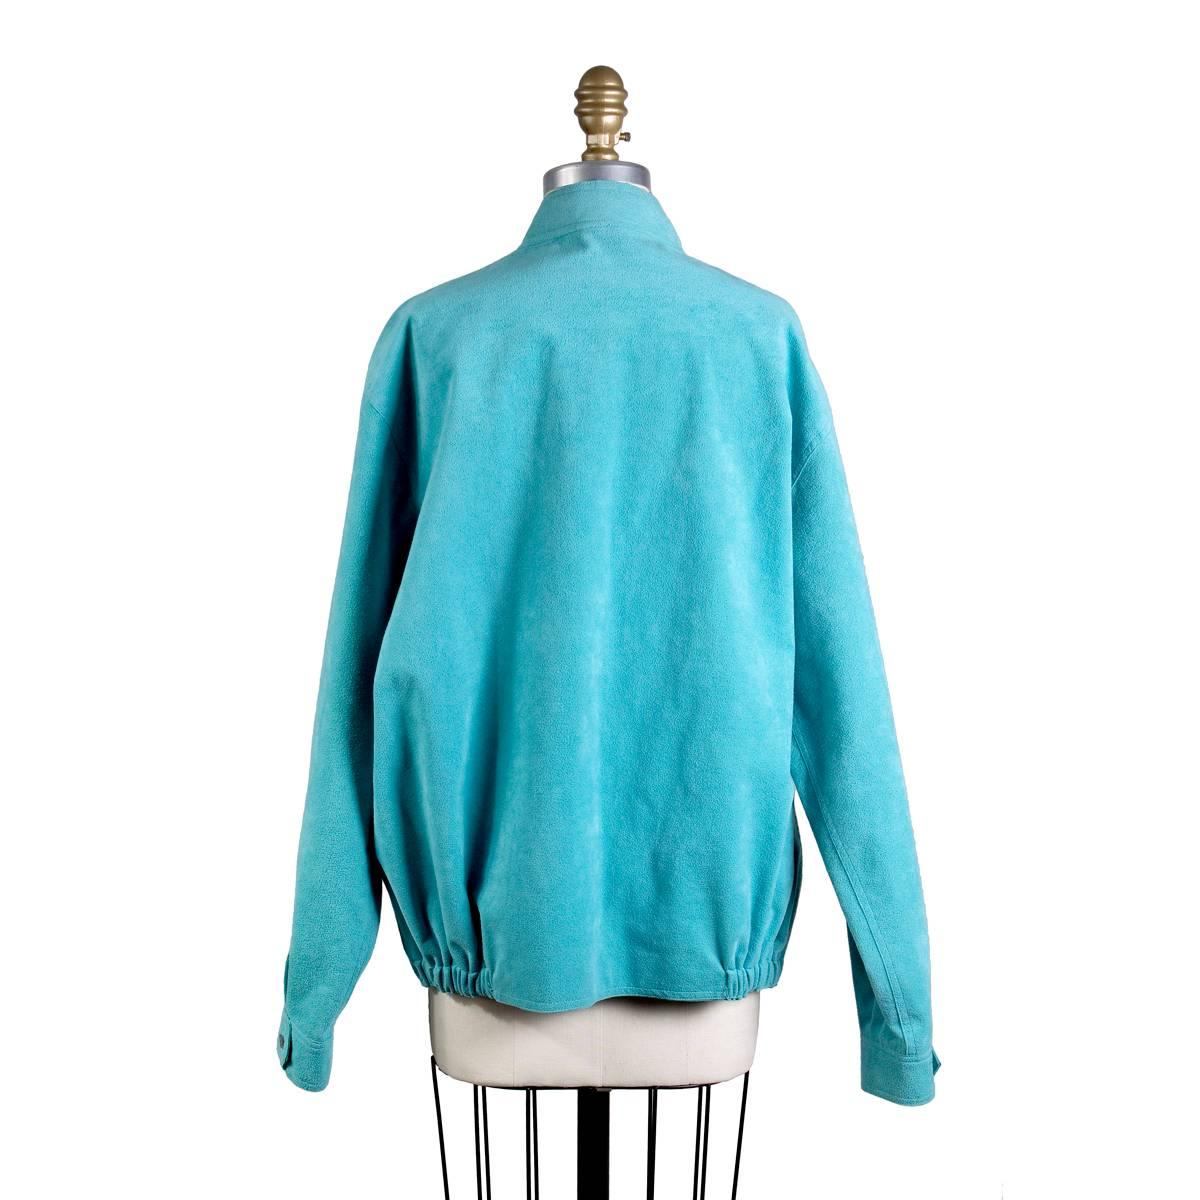 Vintage jacket by Halston circa 1970s
Part of Halston's ultrasuede series
Lightweight suede in turquoise color
Round collar with two buttons
Zip front closure
Condition: Excellent vintage condition
Size/Measurements:
18.5